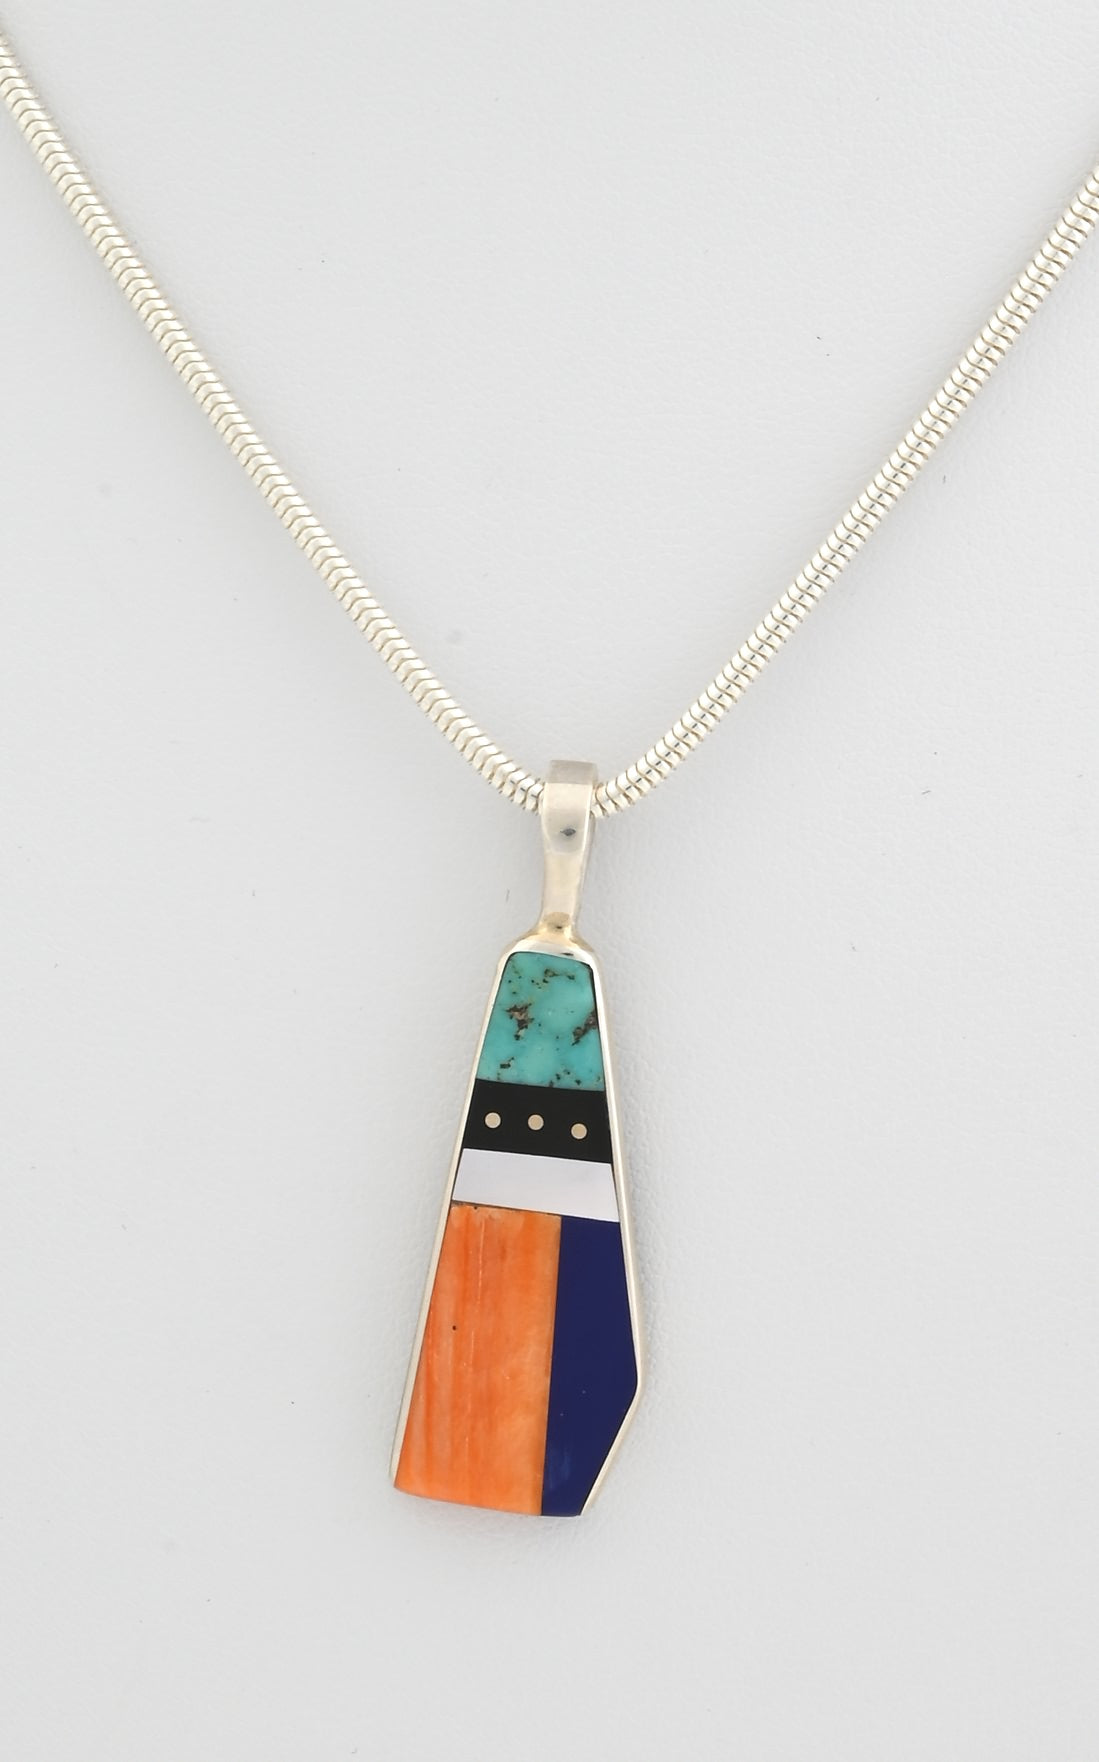 Pendant with Inlay by Jimmy Poyer